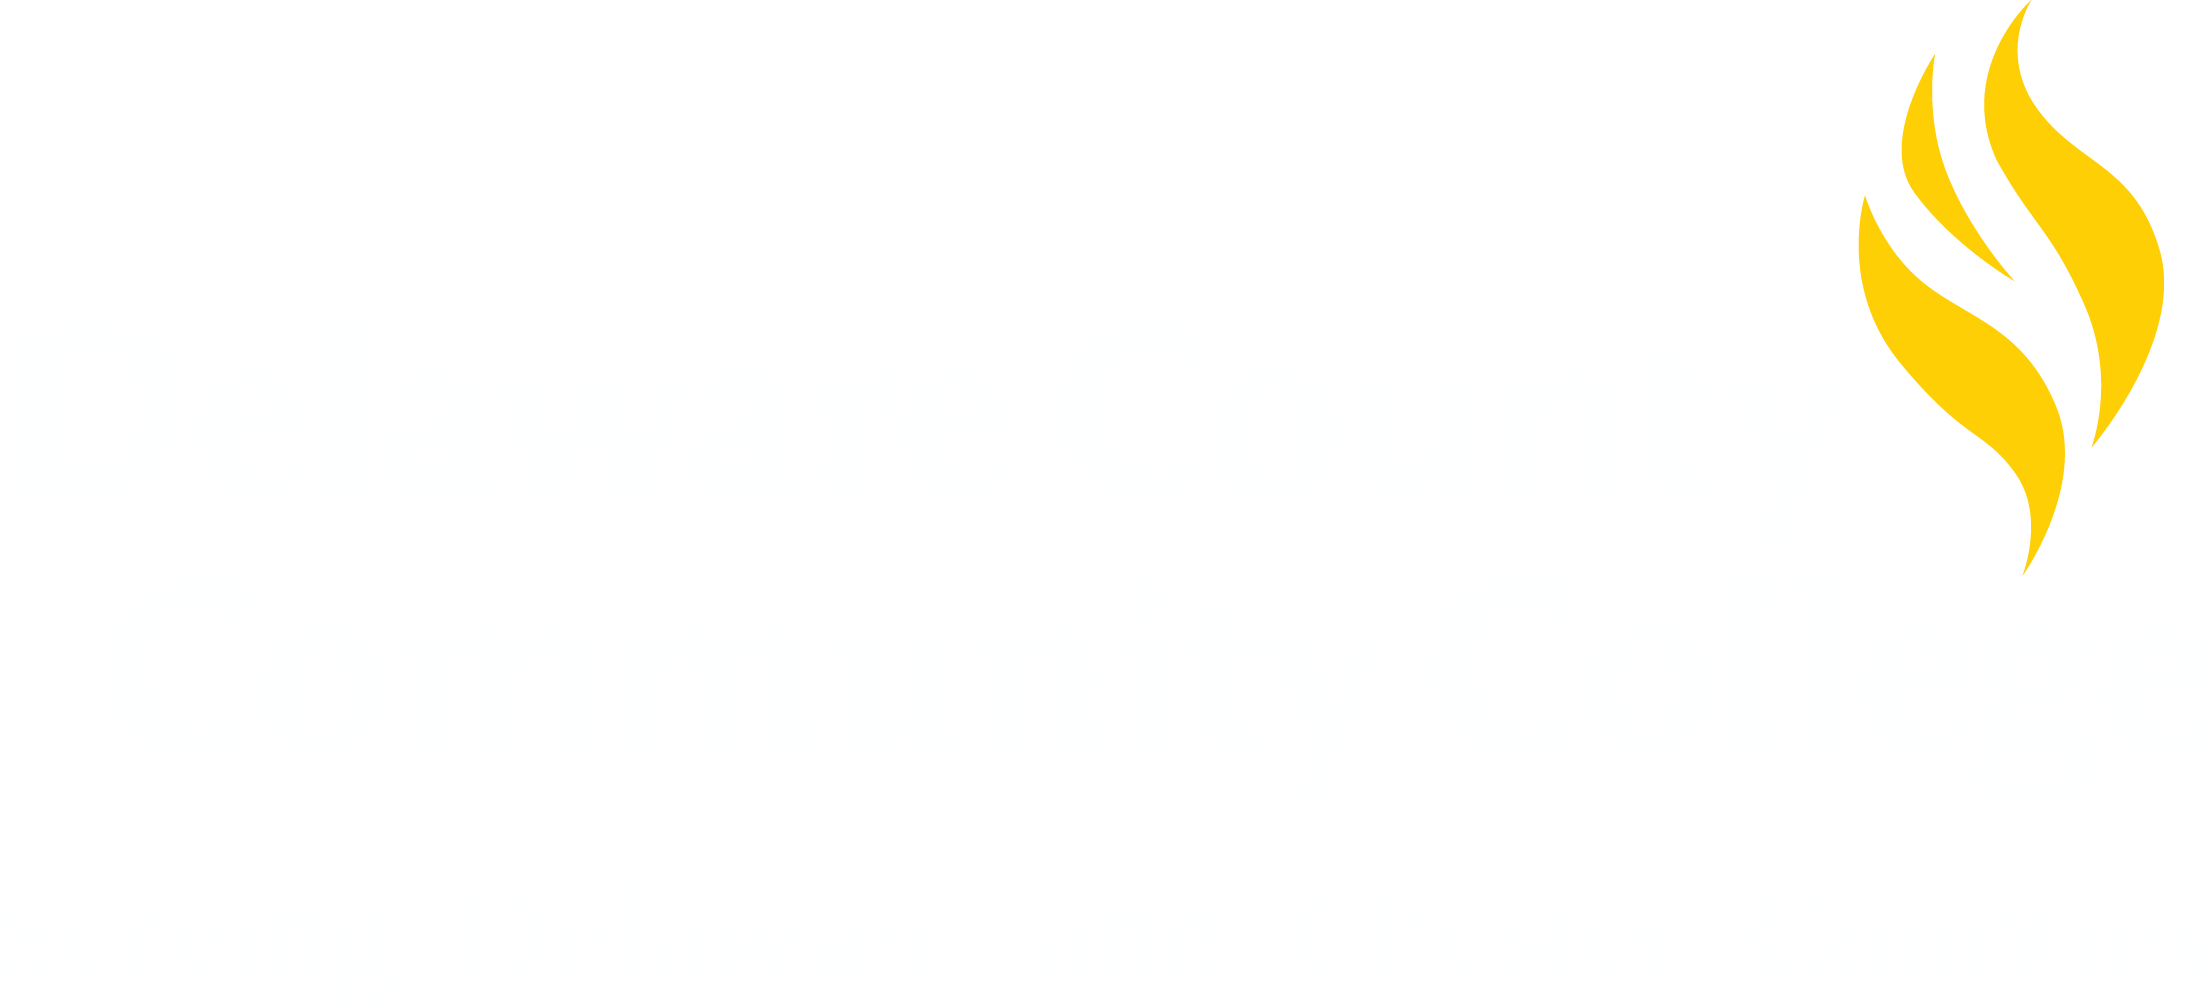 DCCC Logo - Delaware County Community College. Find yourself here